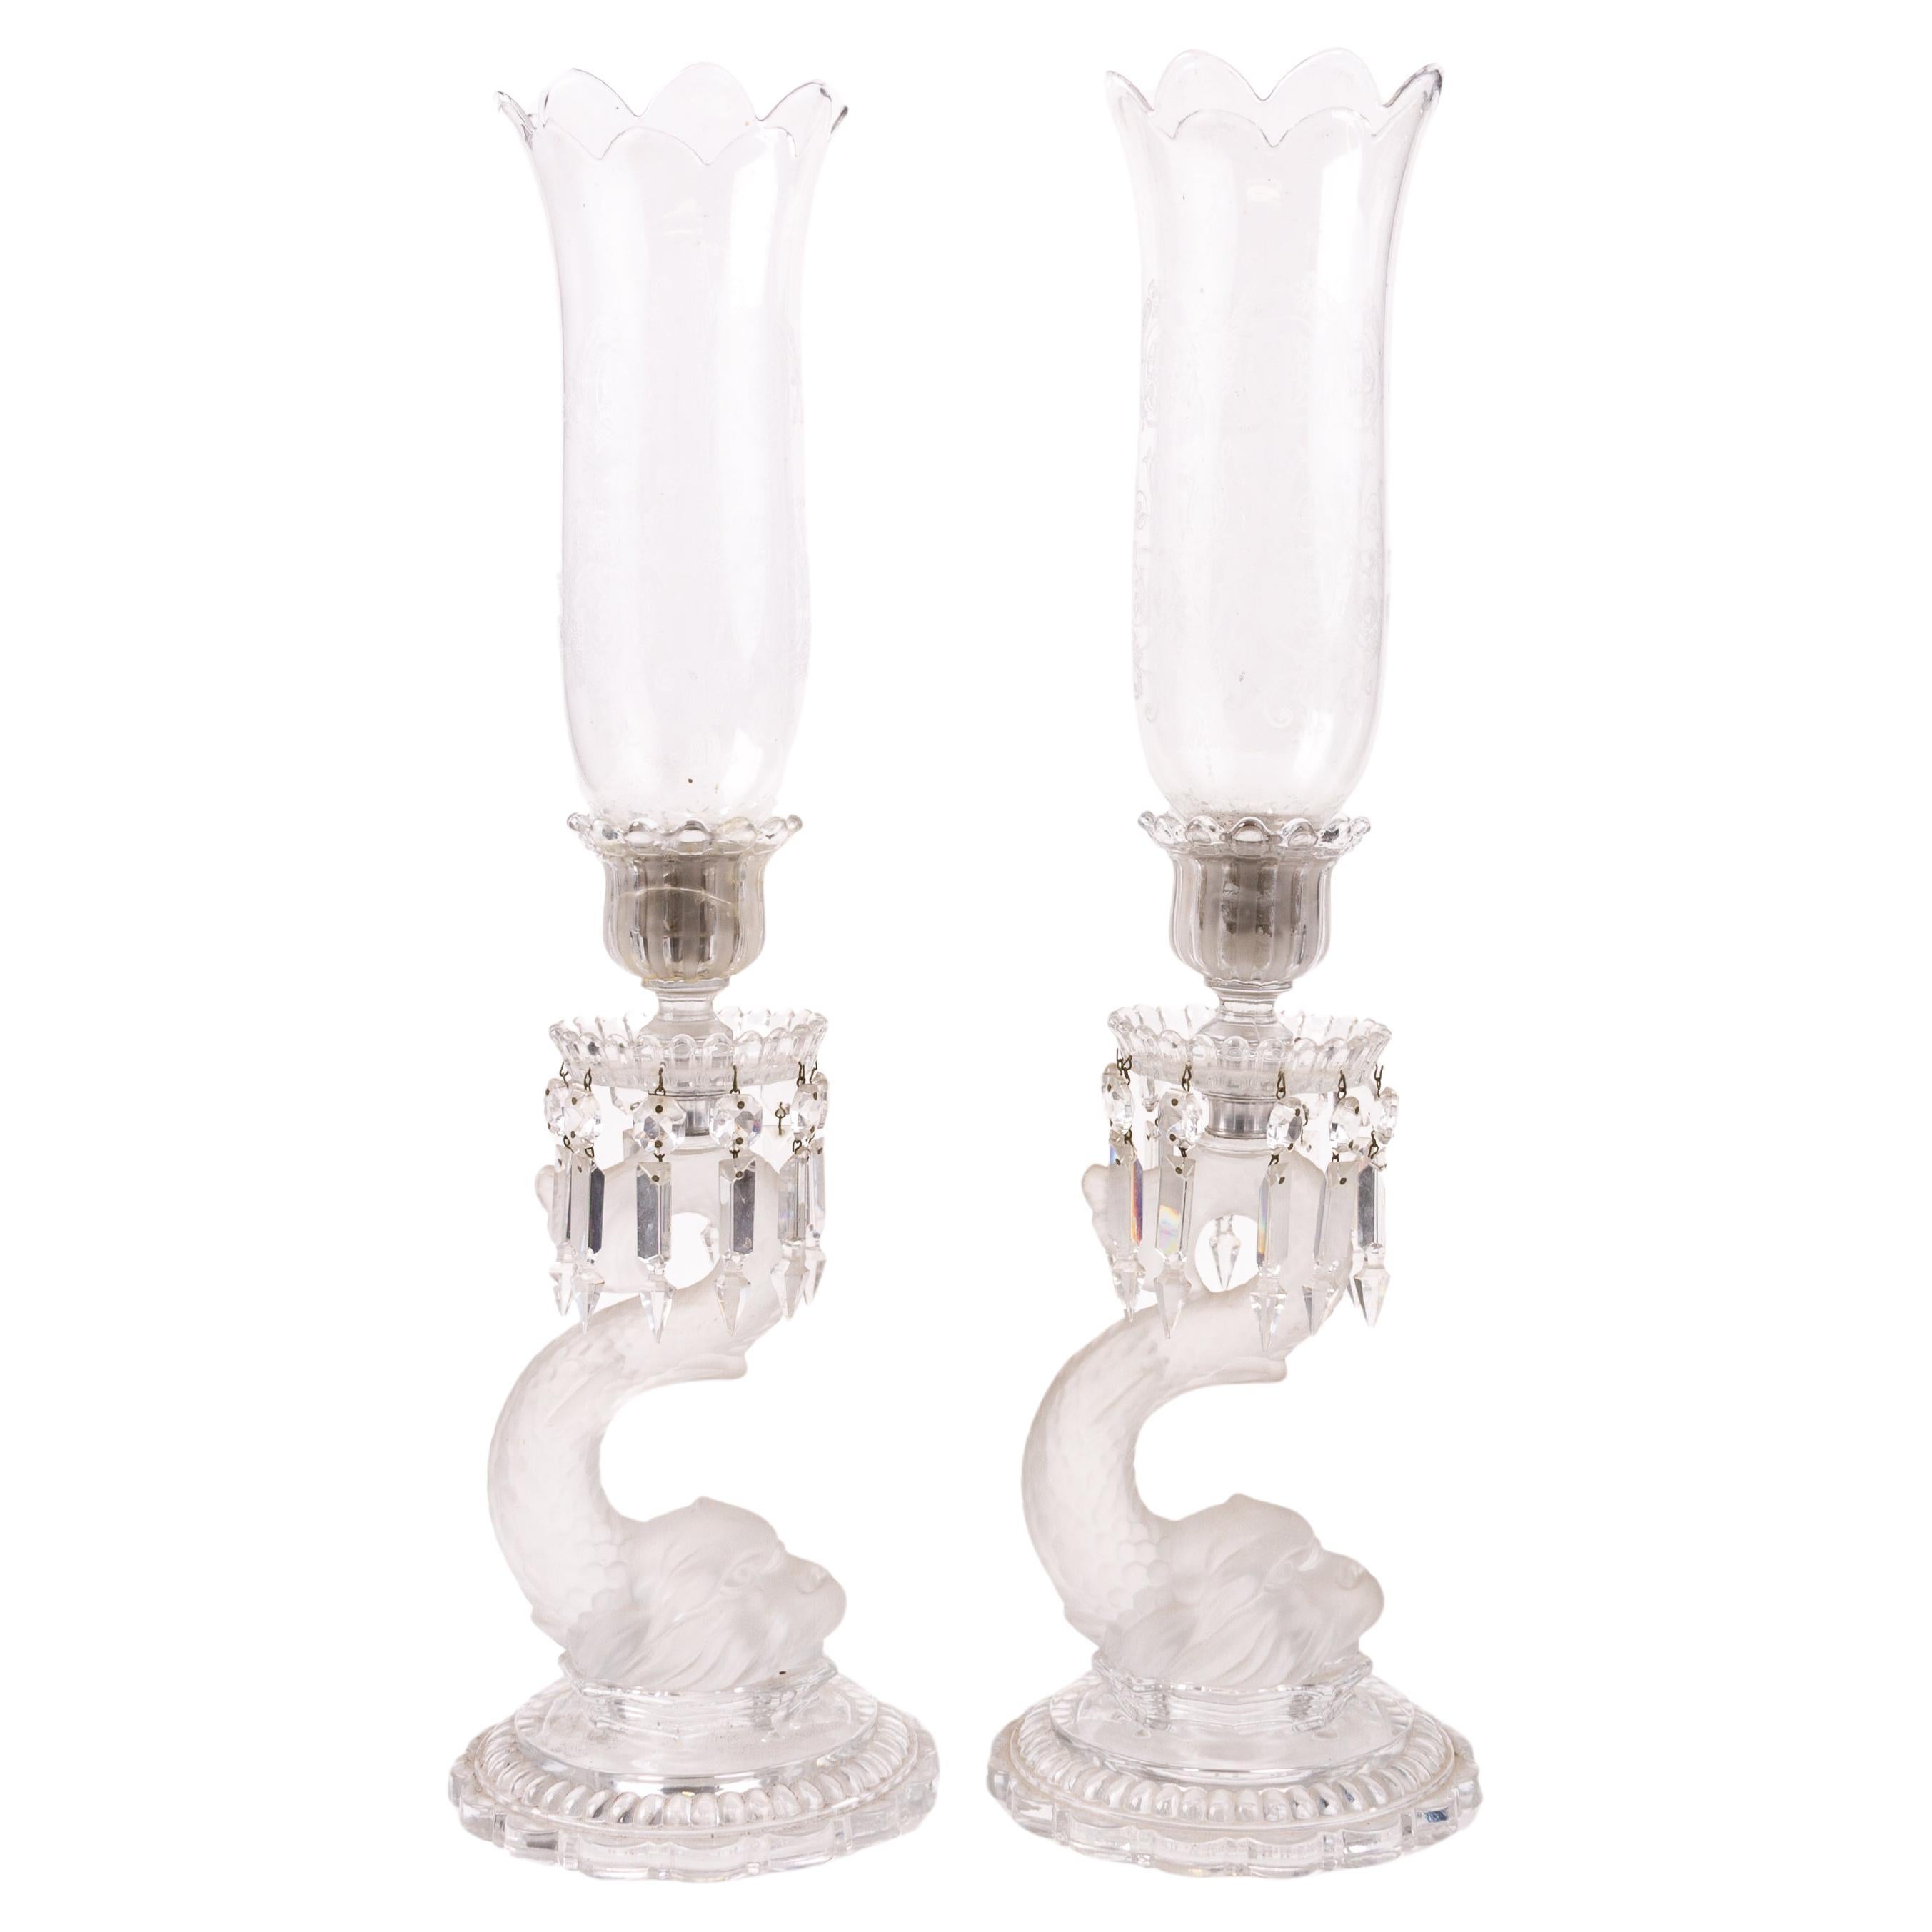 Pair of Baccarat Crystal Dolphin Candle Holders Early 20th Century For Sale